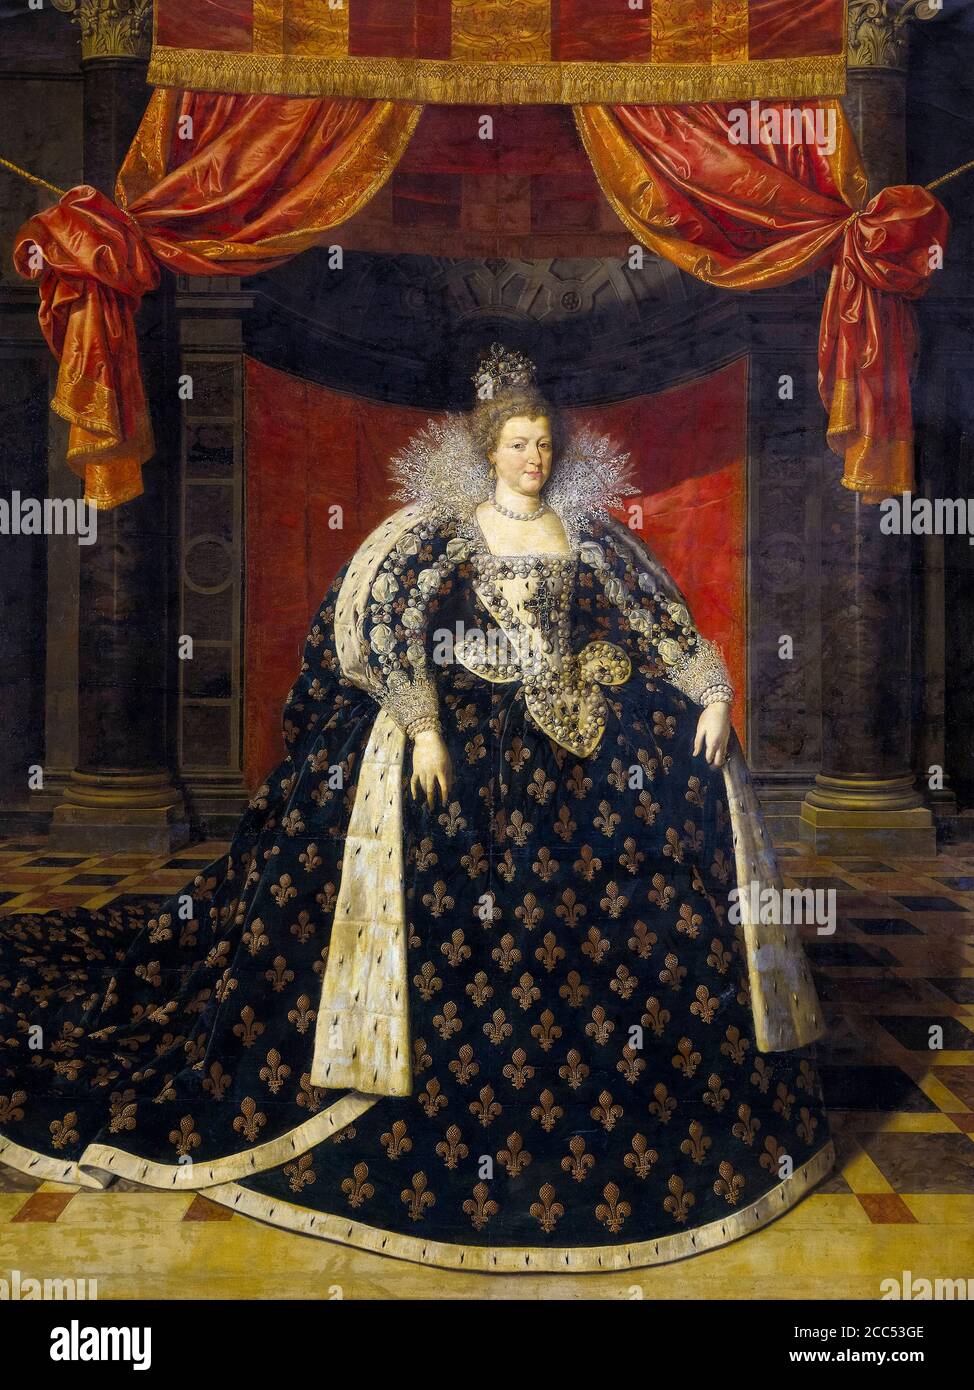 Marie de Medici (1575-1642), Queen of France, Consort of Henry IV, portrait painting by Workshop of Frans Pourbus II, 1590-1620 Stock Photo